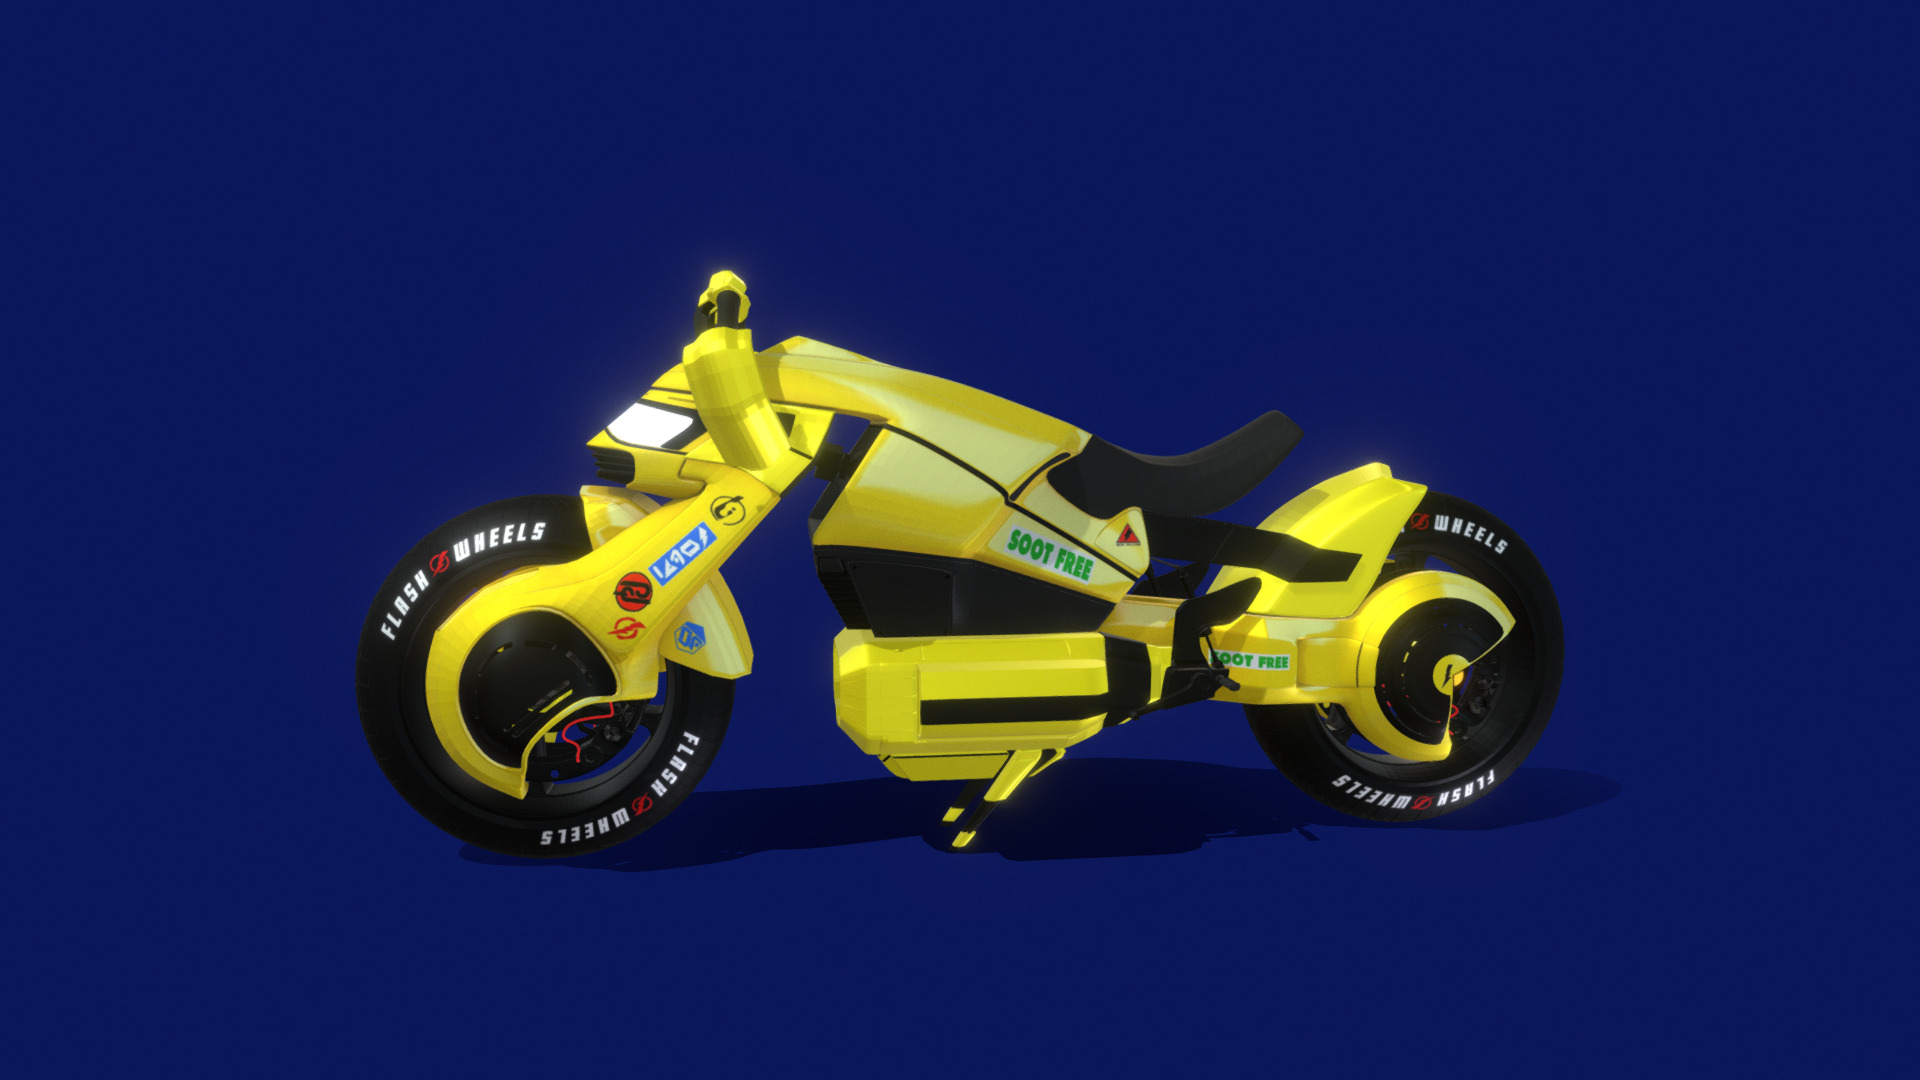 3D model FLASH BIKE Hybrid - This is a 3D model of the FLASH BIKE Hybrid. The 3D model is about a yellow and black race car.